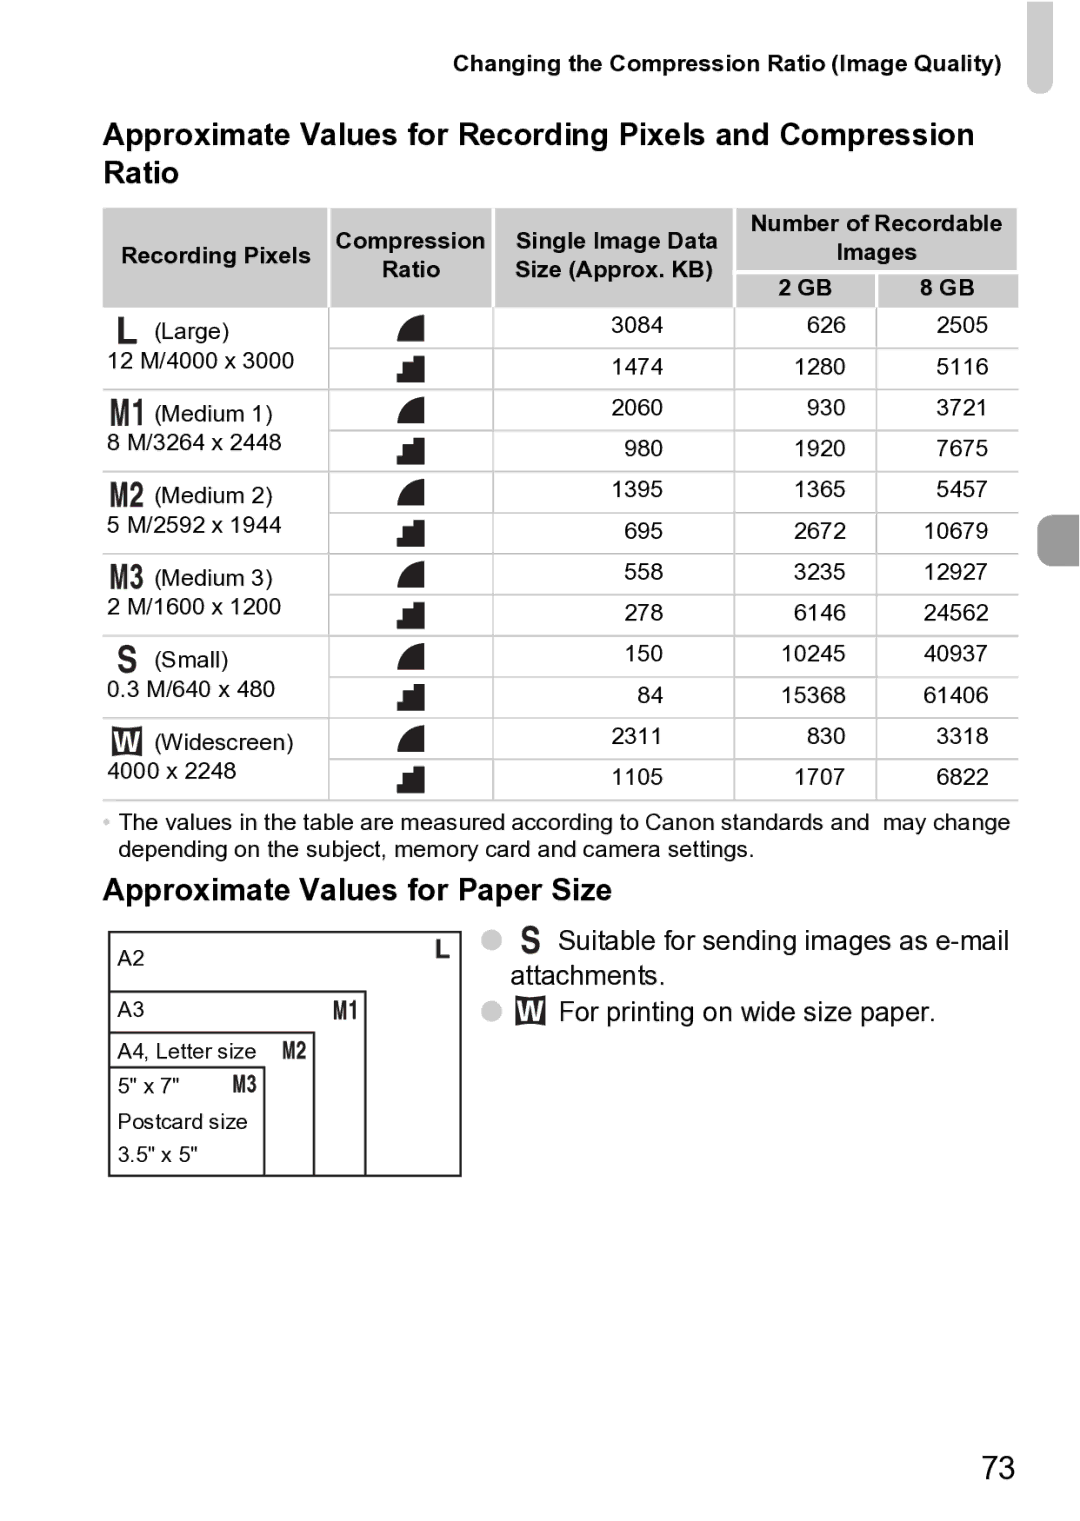 Canon Sx200 Is manual Approximate Values for Paper Size, Changing the Compression Ratio Image Quality, Recording Pixels 